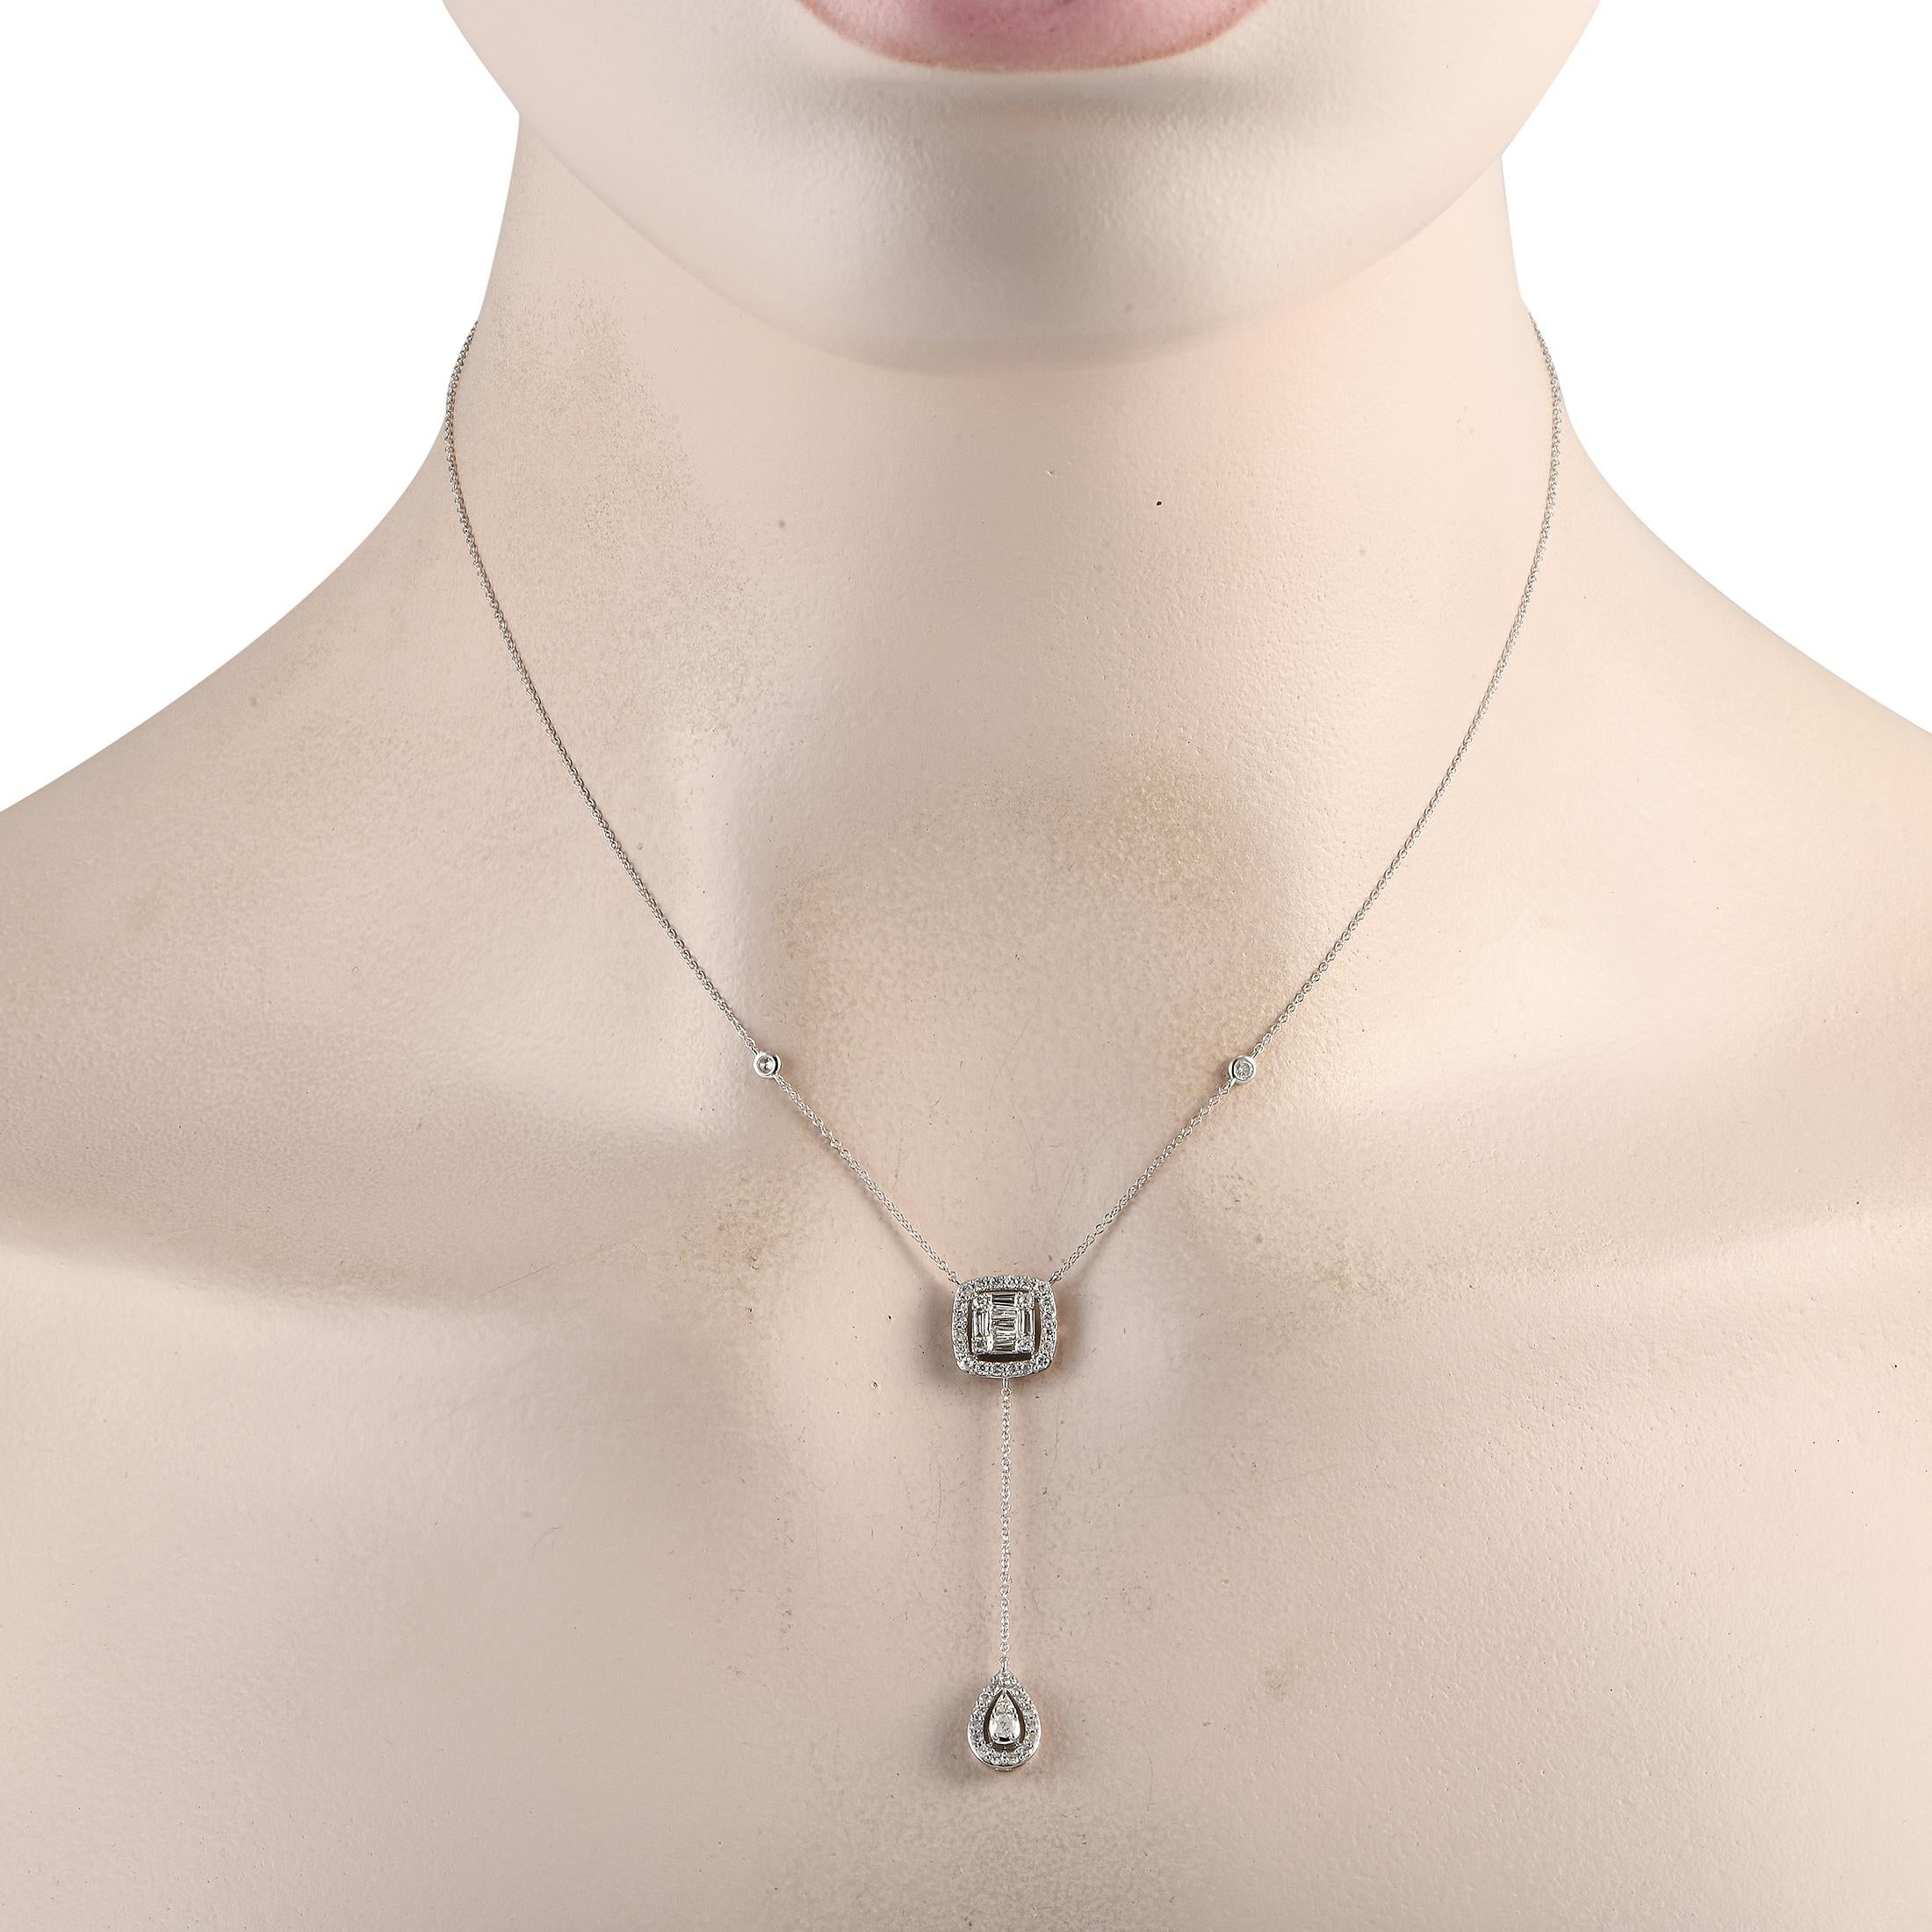 This luxurious necklace will add a touch of sparkle to any ensemble. At the center of this pieces 15 chain, youll find a dangling pendant measuring 2 long. Crafted from 14K White Gold, the design beautifully showcases sparkling Diamonds with a total